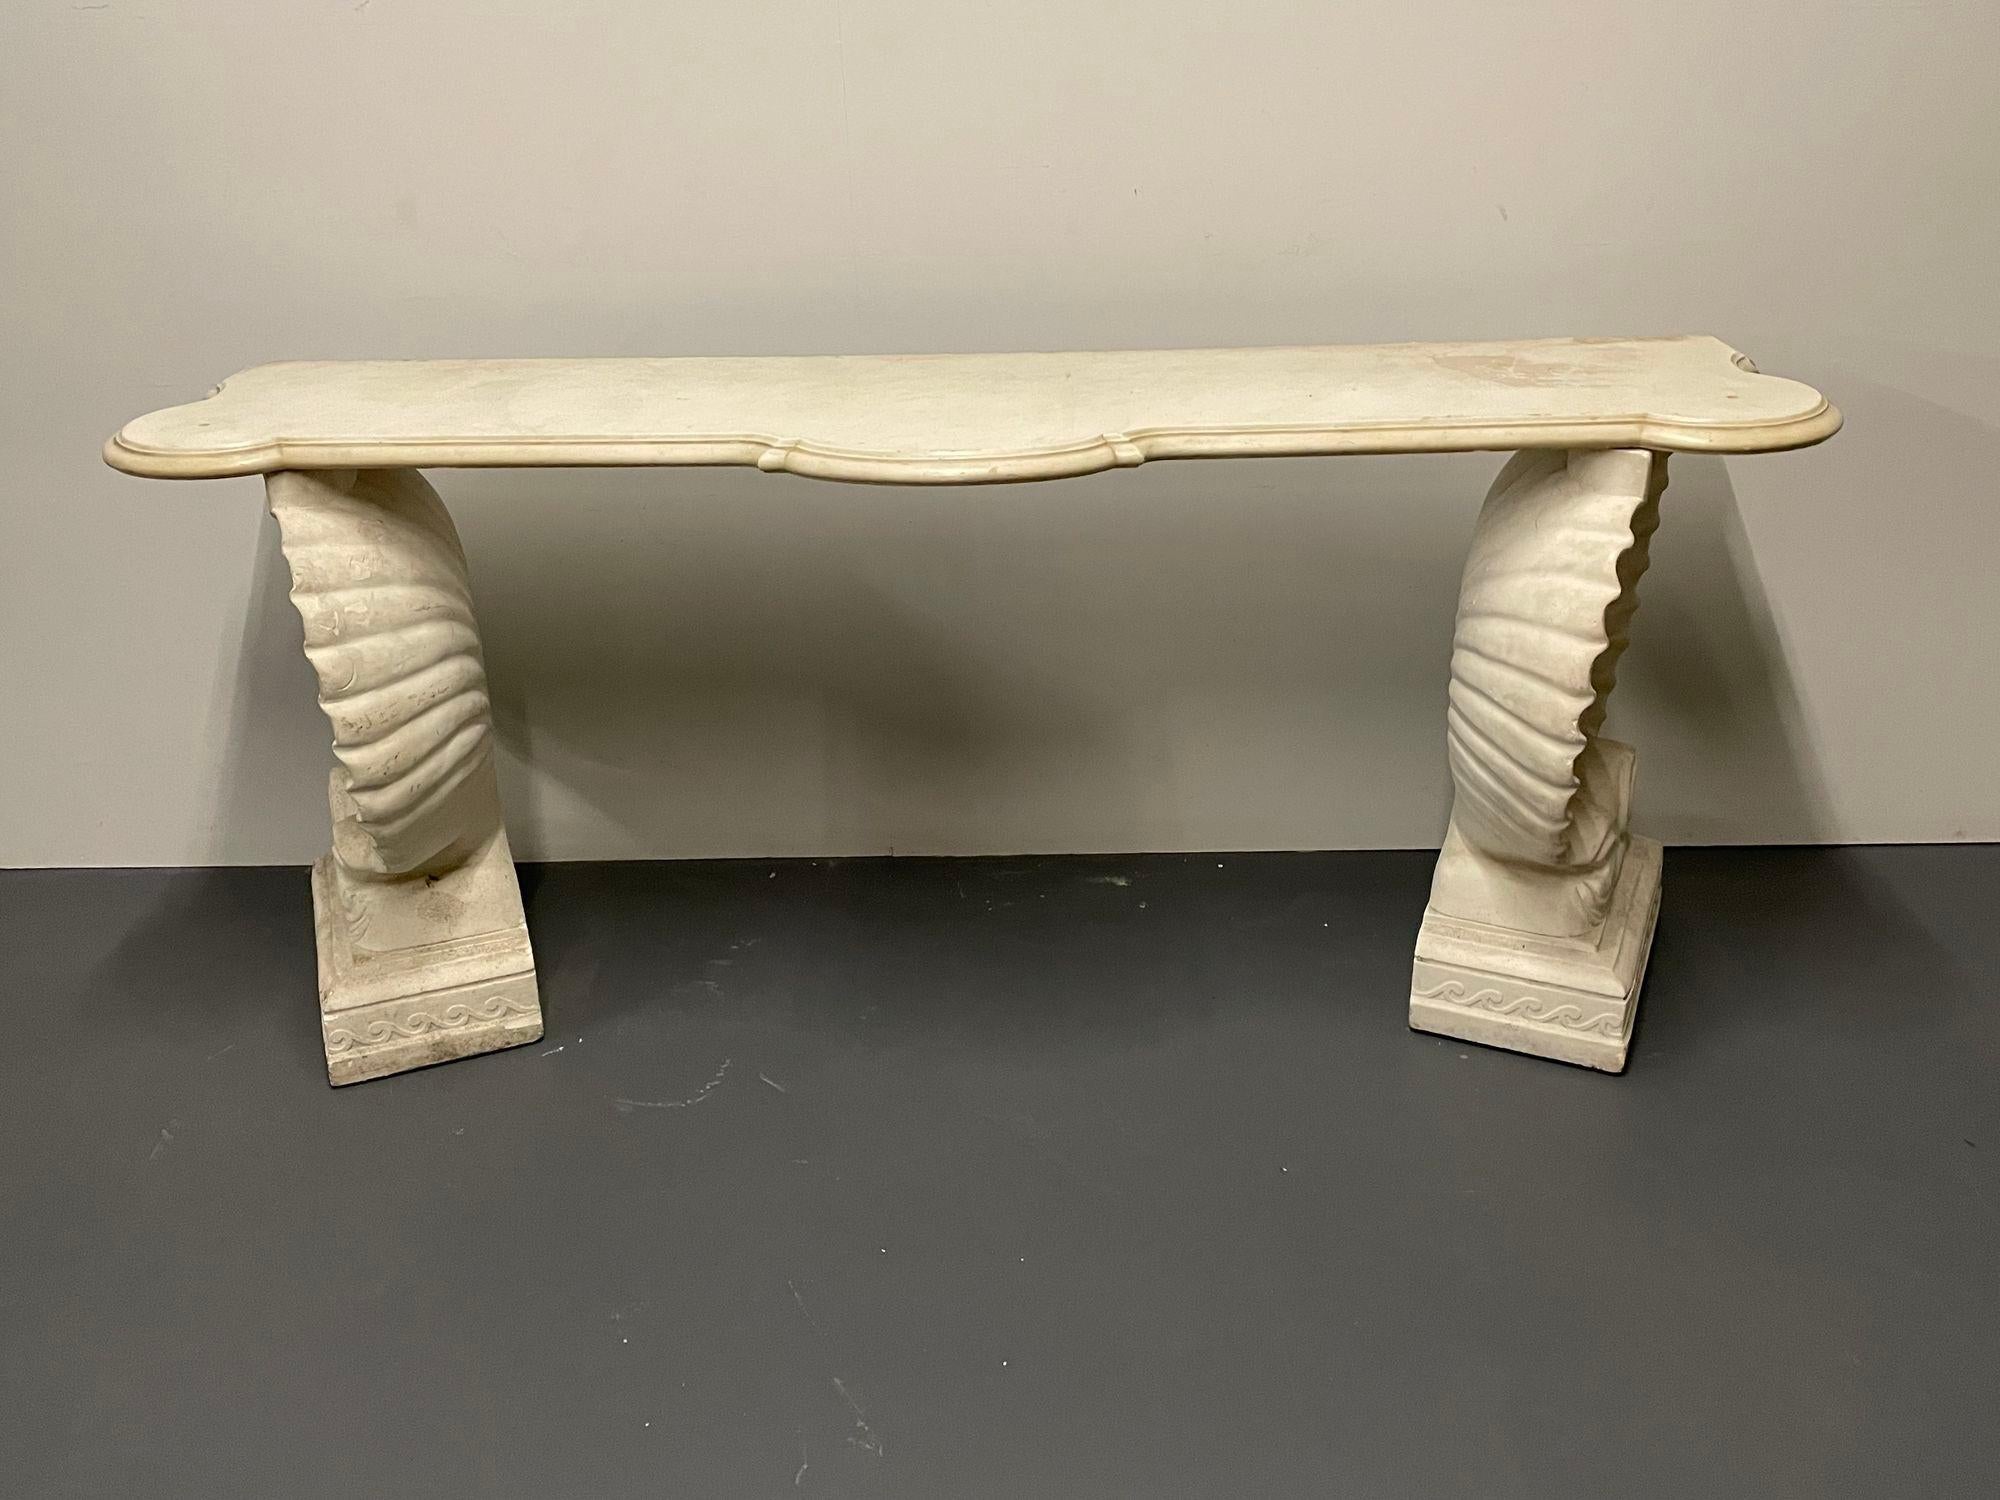 Cast Stone Shell Console Table, Marble, Stone, Early 20th Century, Custom Made.